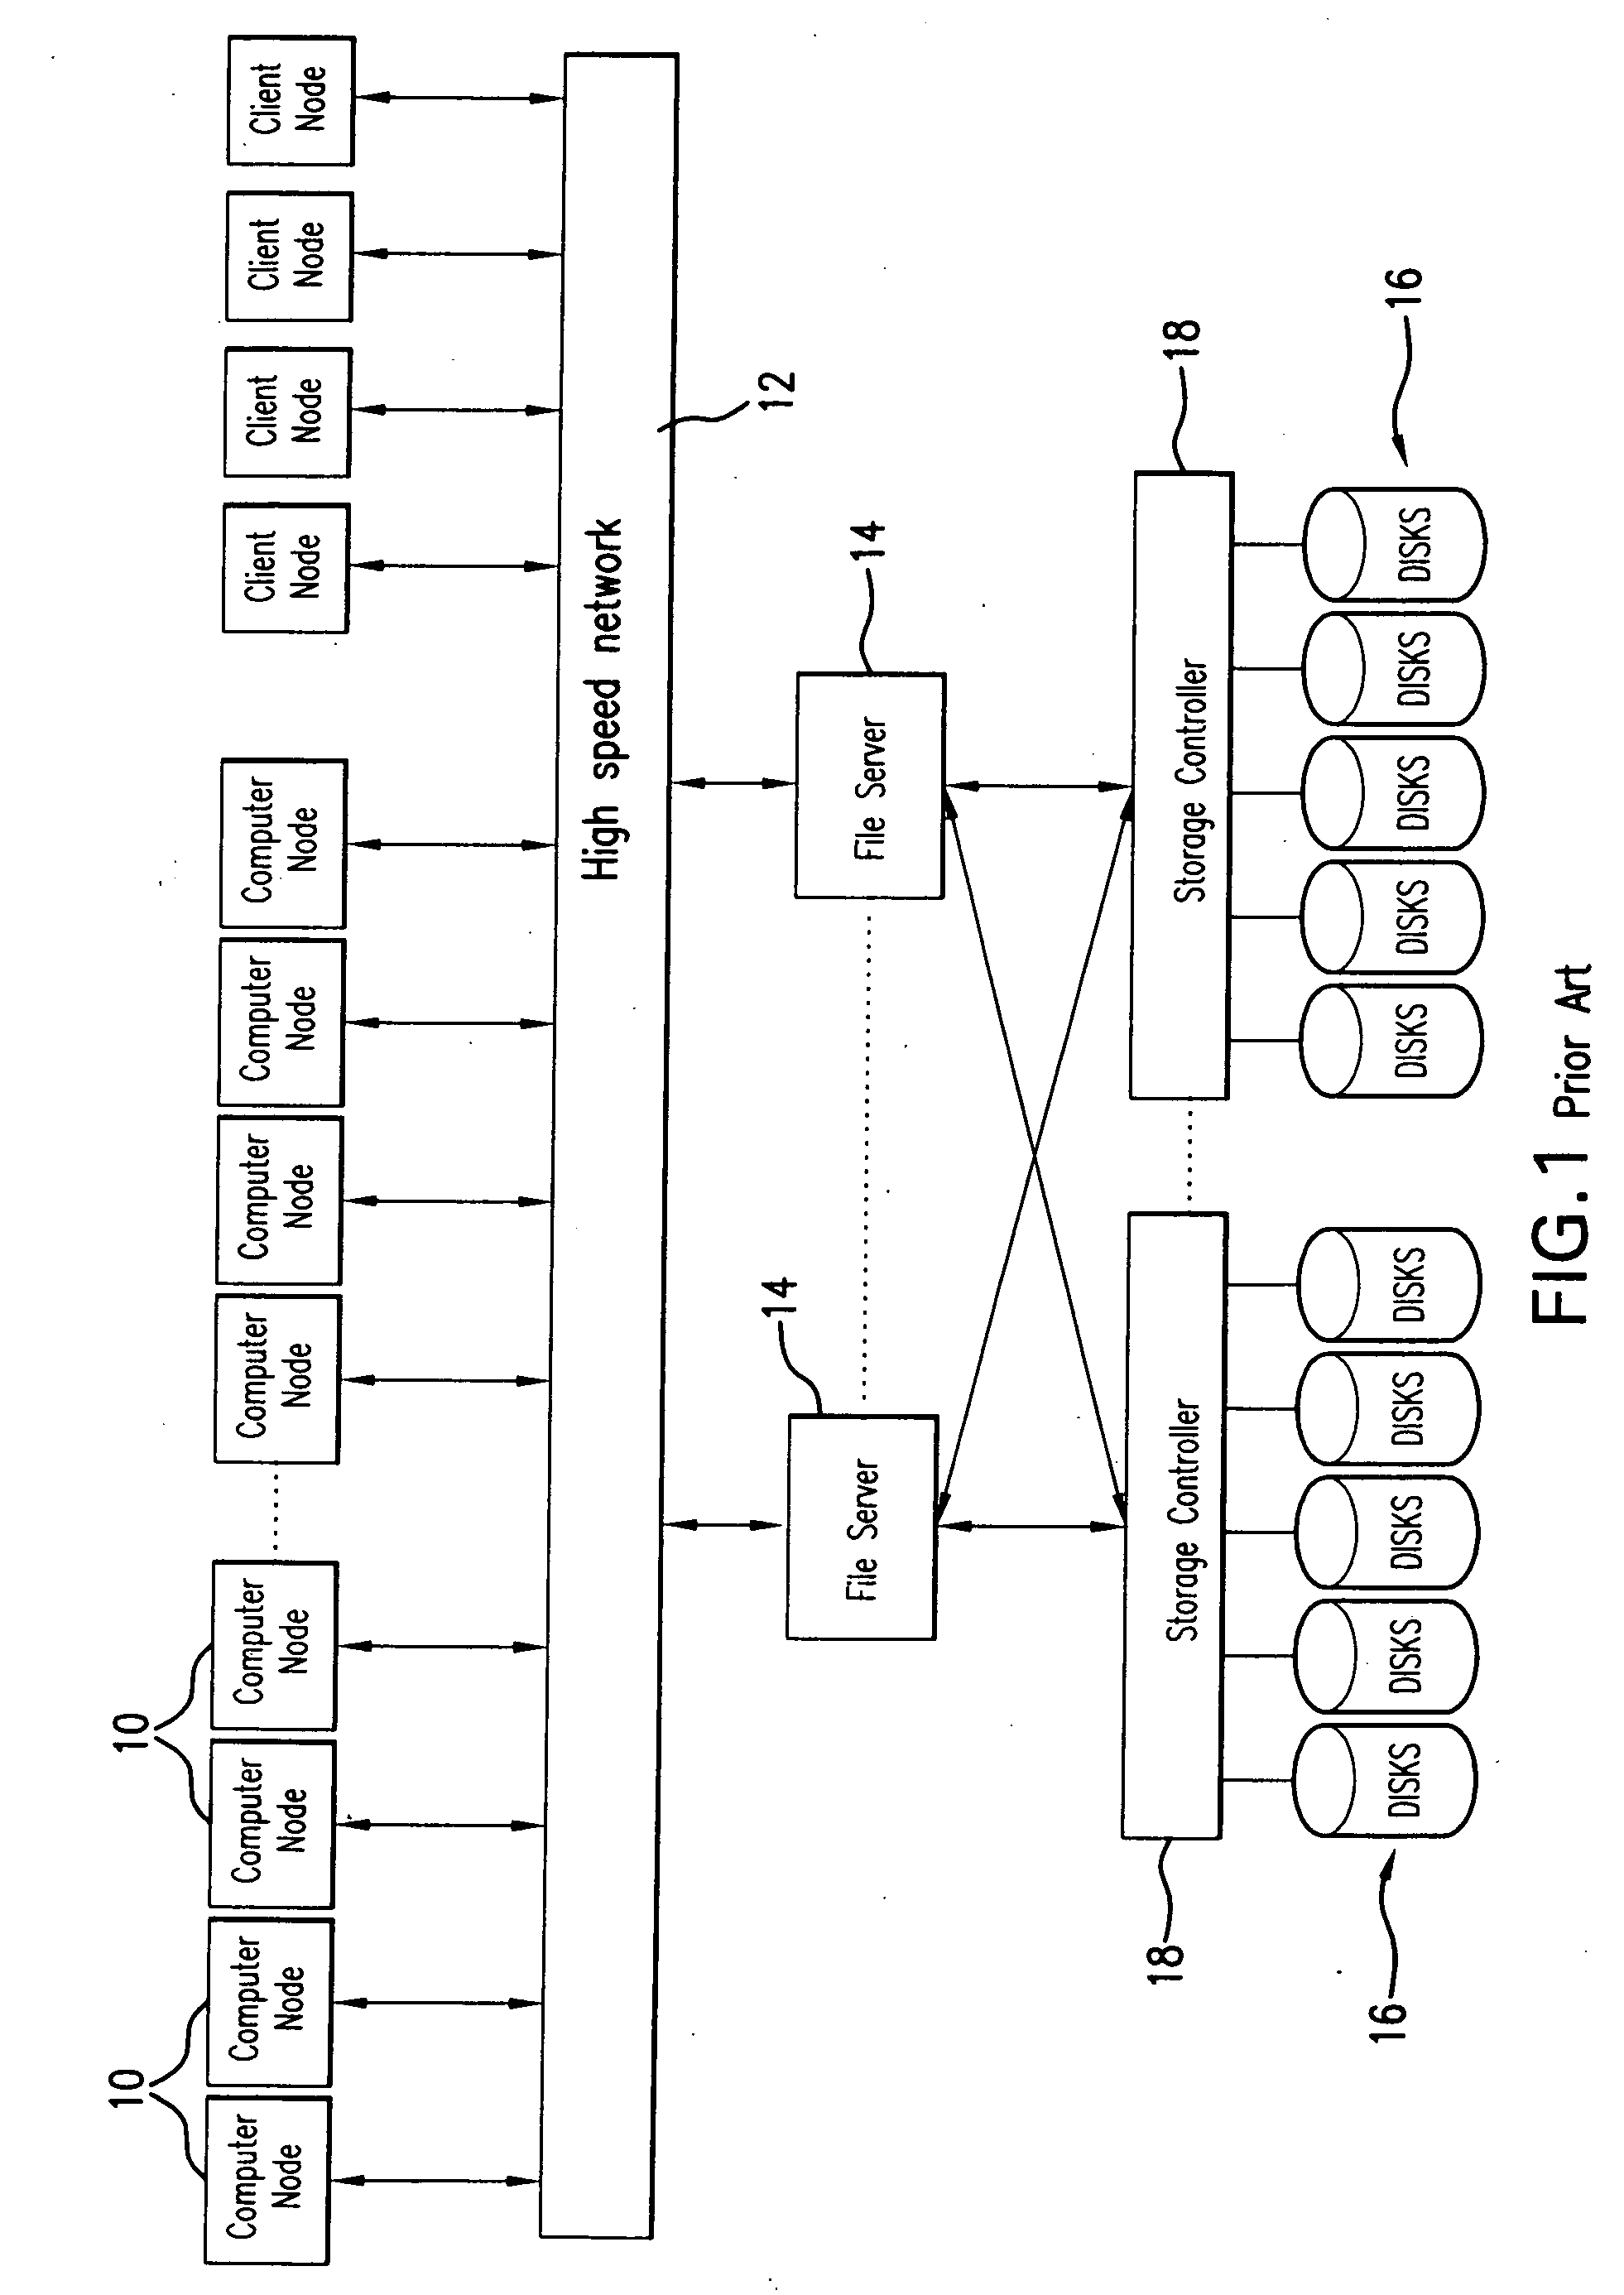 System and method for data migration between computer cluster architecture and data storage devices